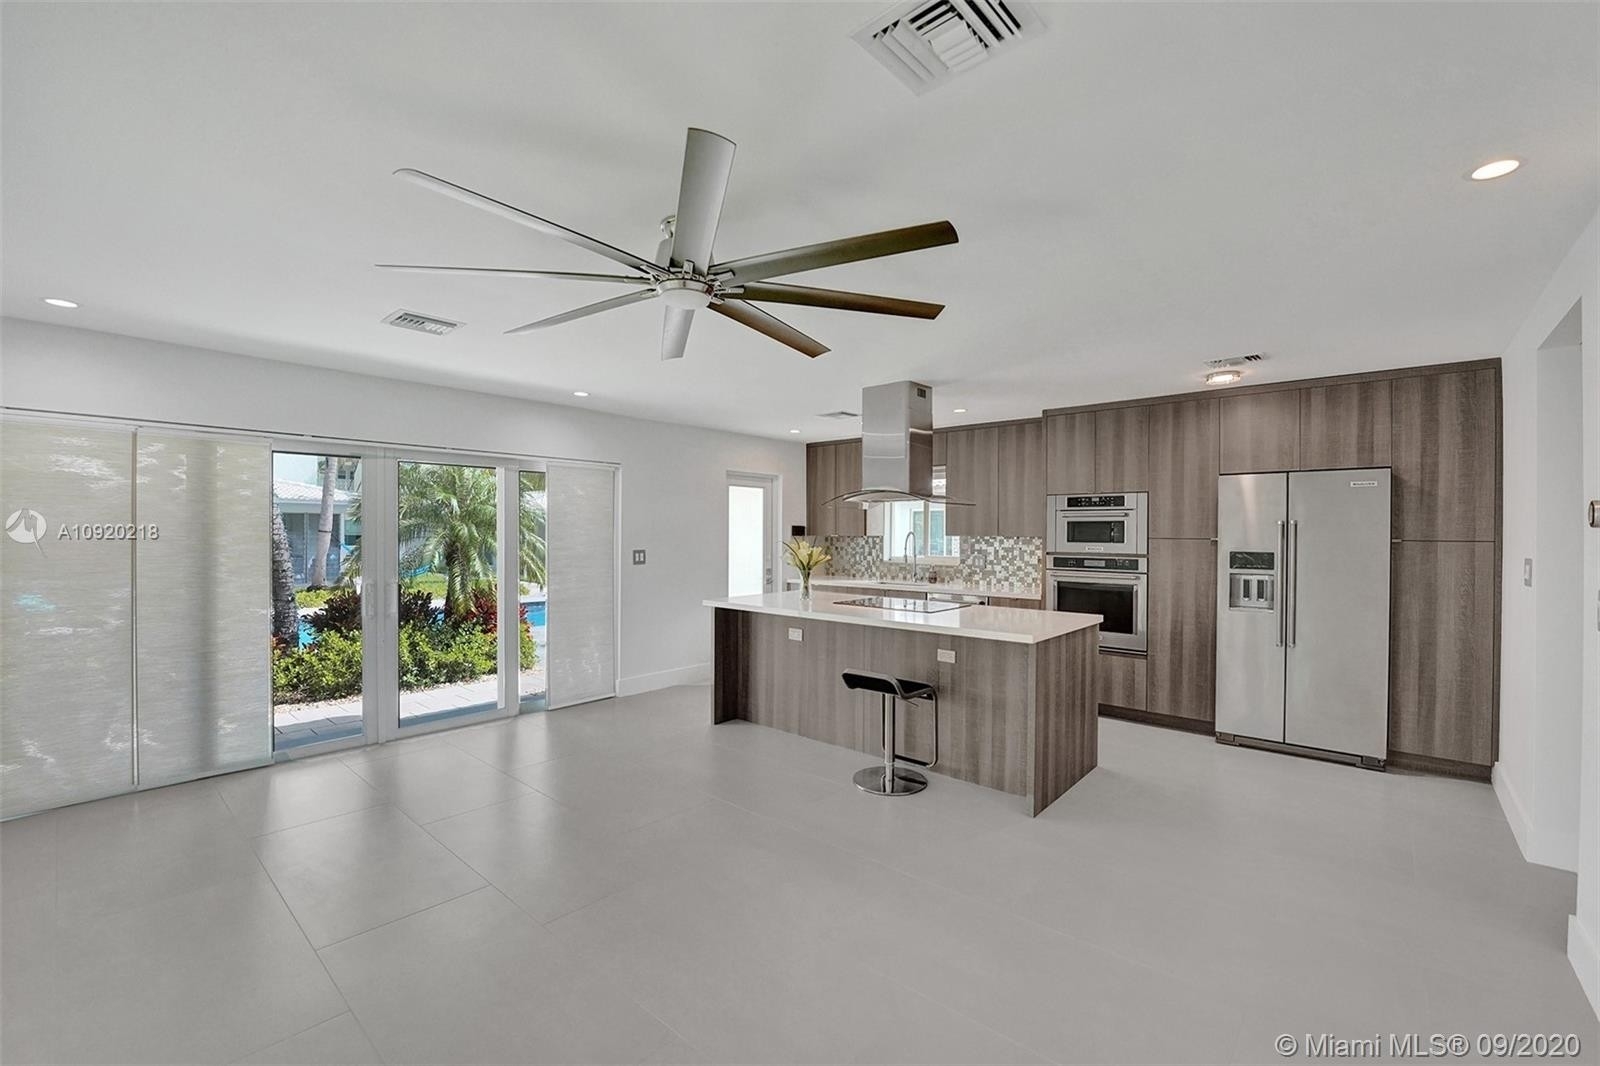 4. Rentals at 2706 NE 32nd Ave, 1 Fort Lauderdale